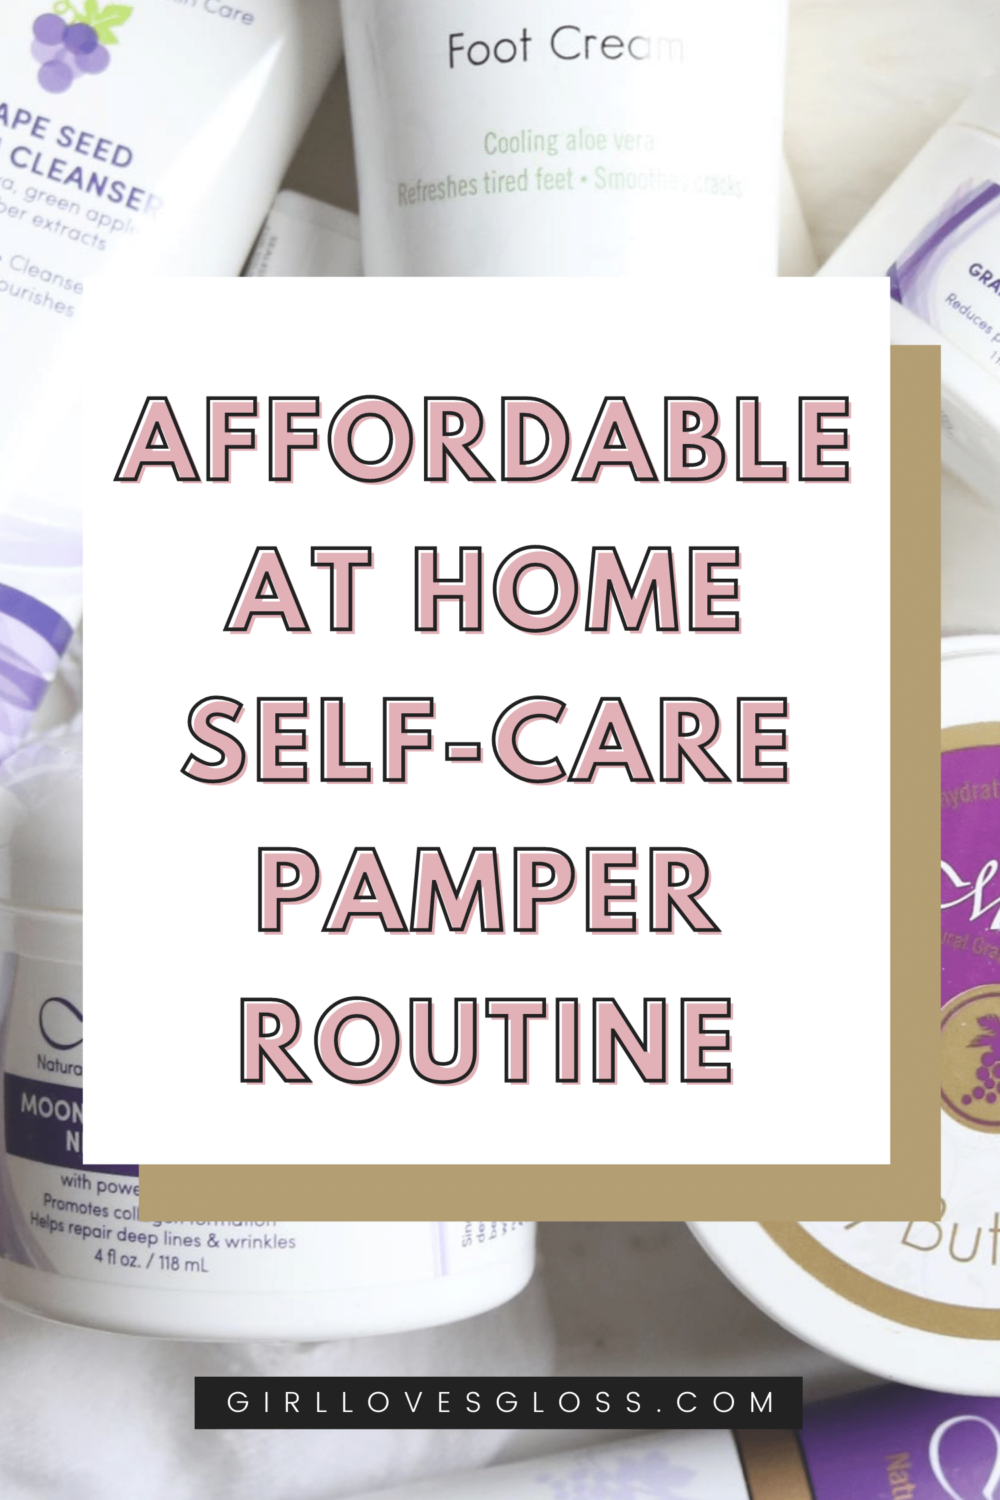 Affordable self-care at home pamper routine using budget friend skincare